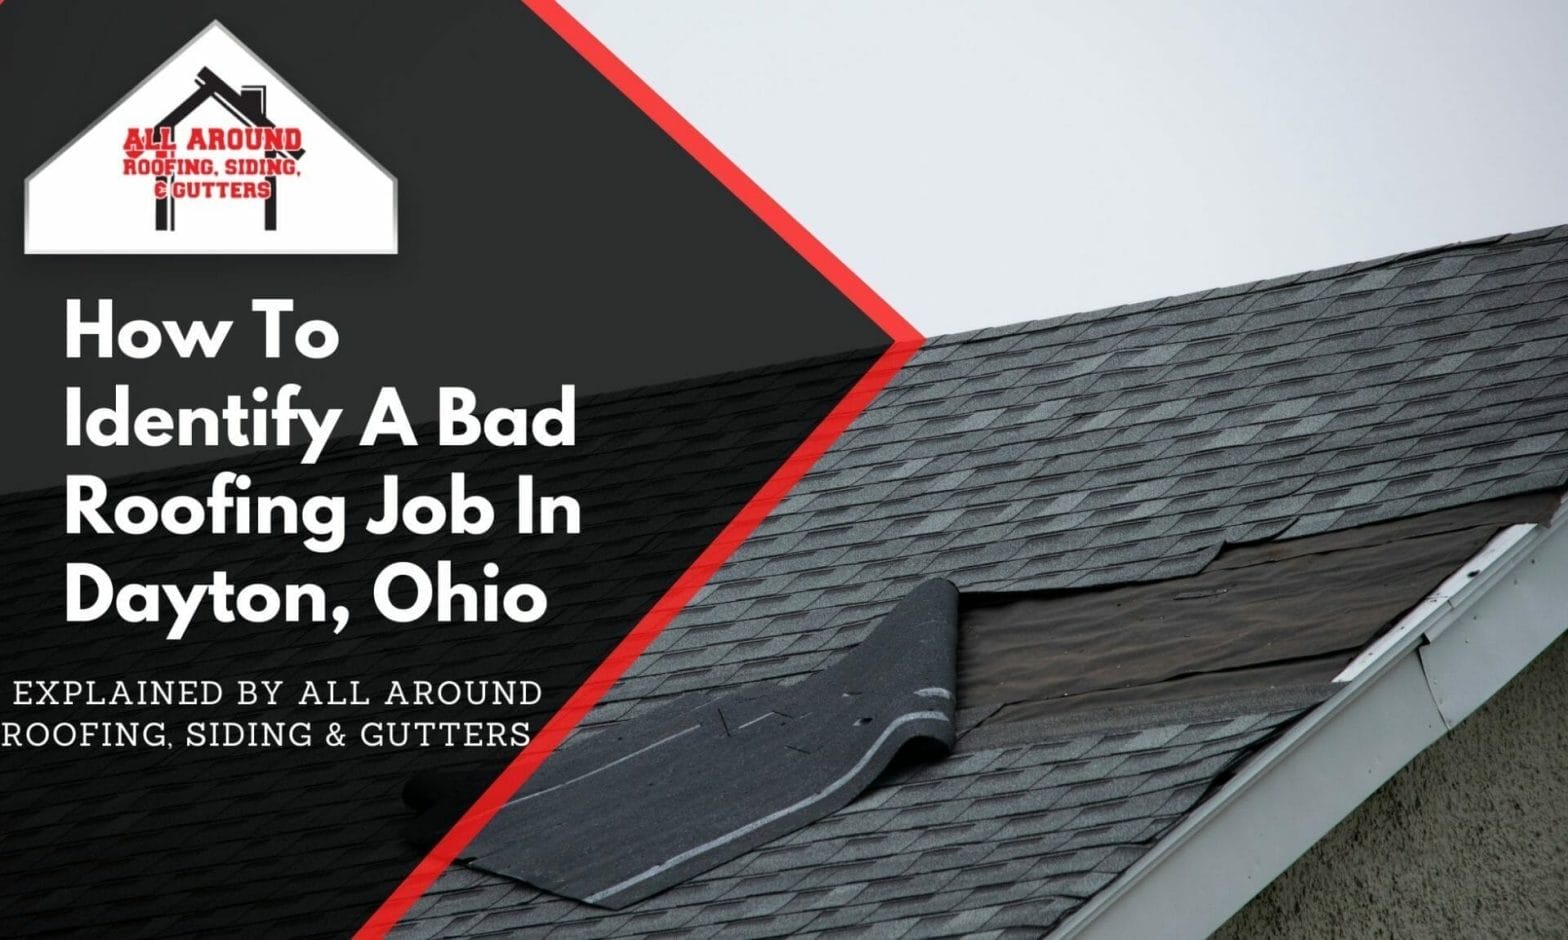 How To Identify A Bad Roofing Job In Dayton, Ohio